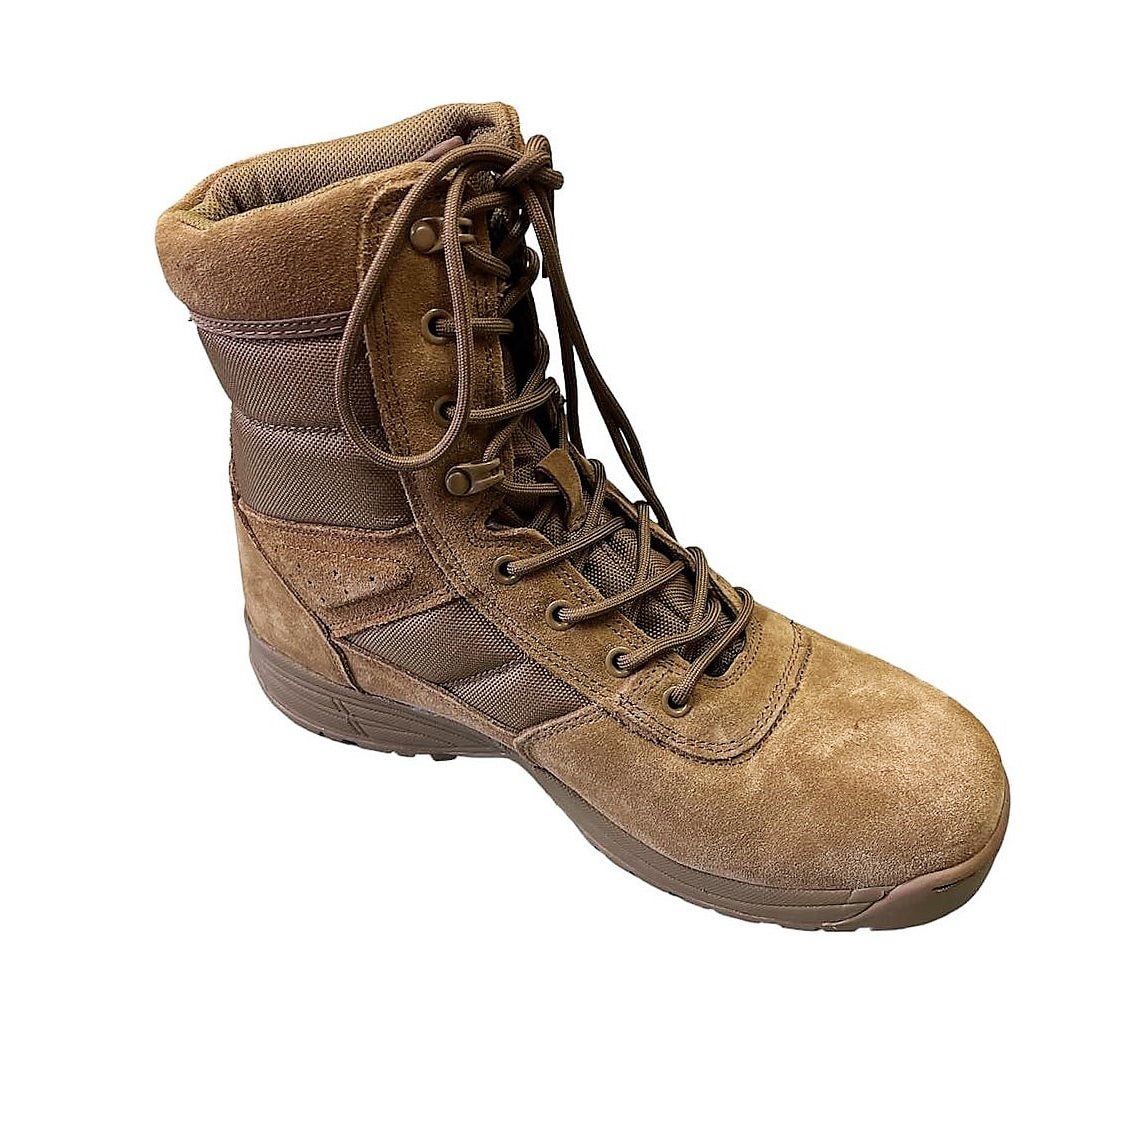 High boots Spiral 8.0 coyote eXc 20-8003 L-11